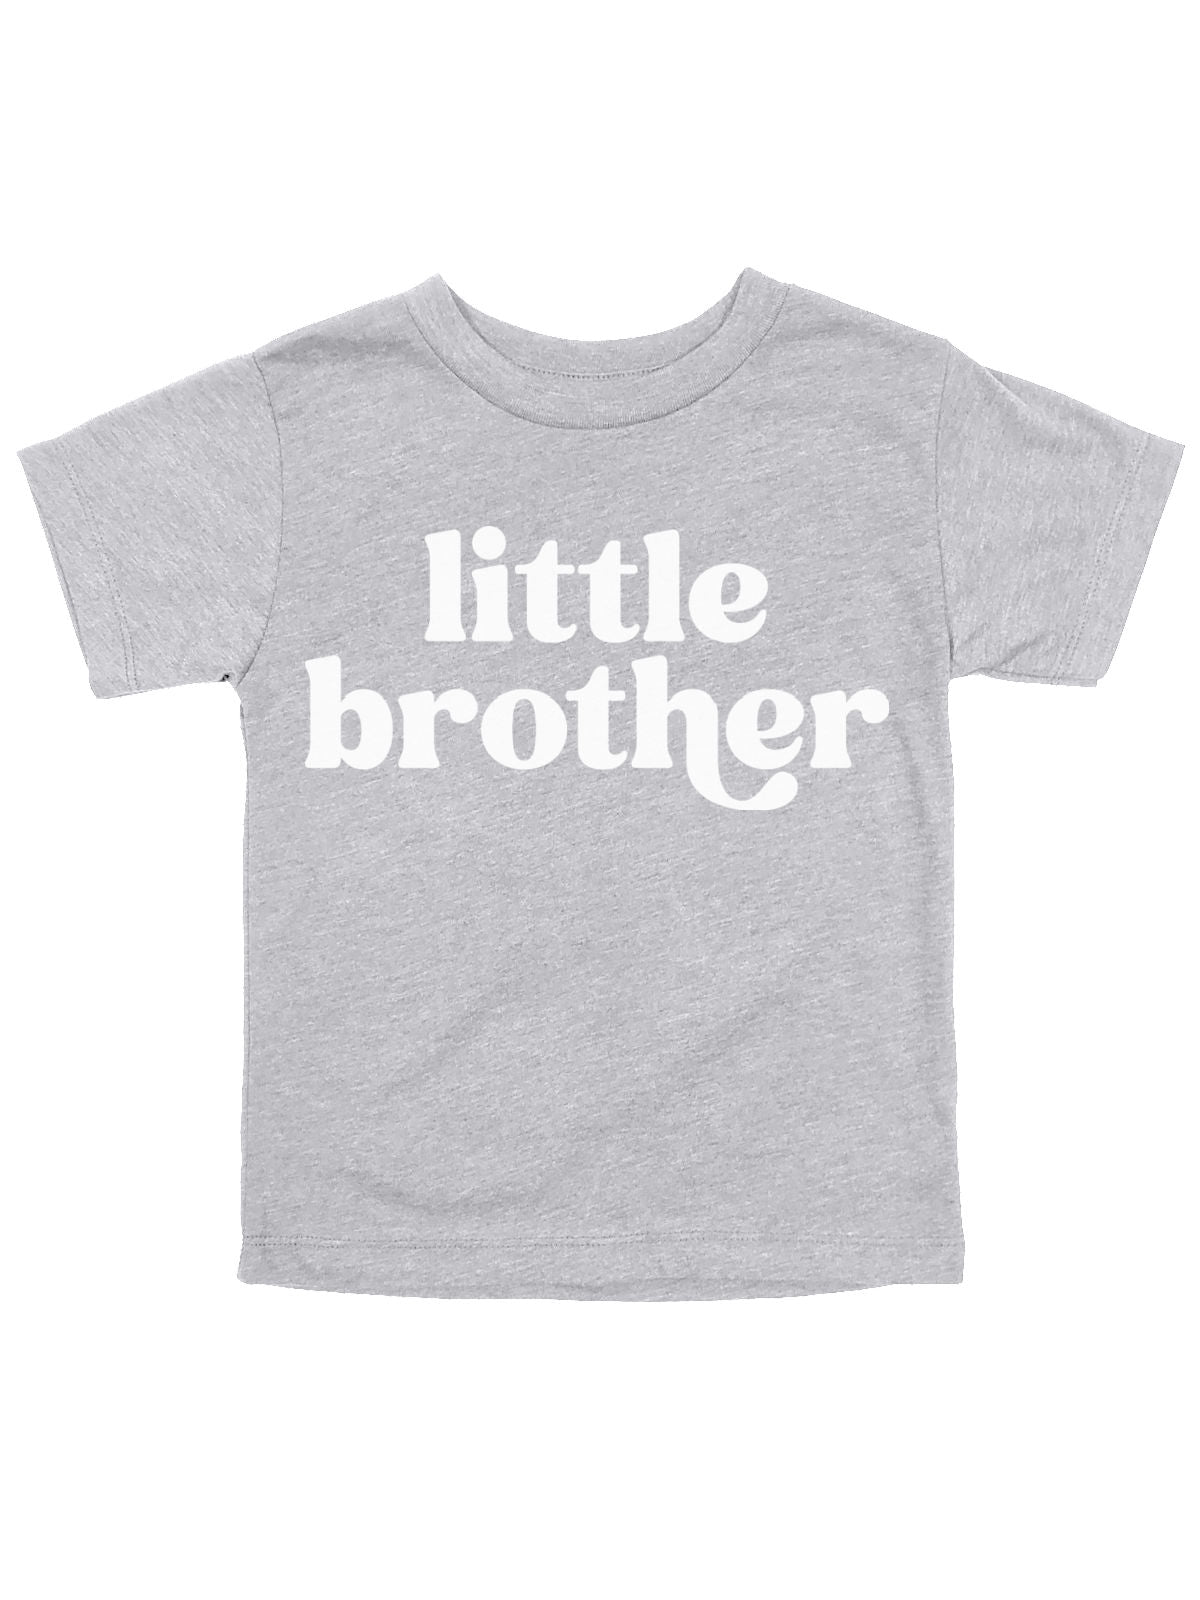 Little Brother Infant Shirt in Heather Gray